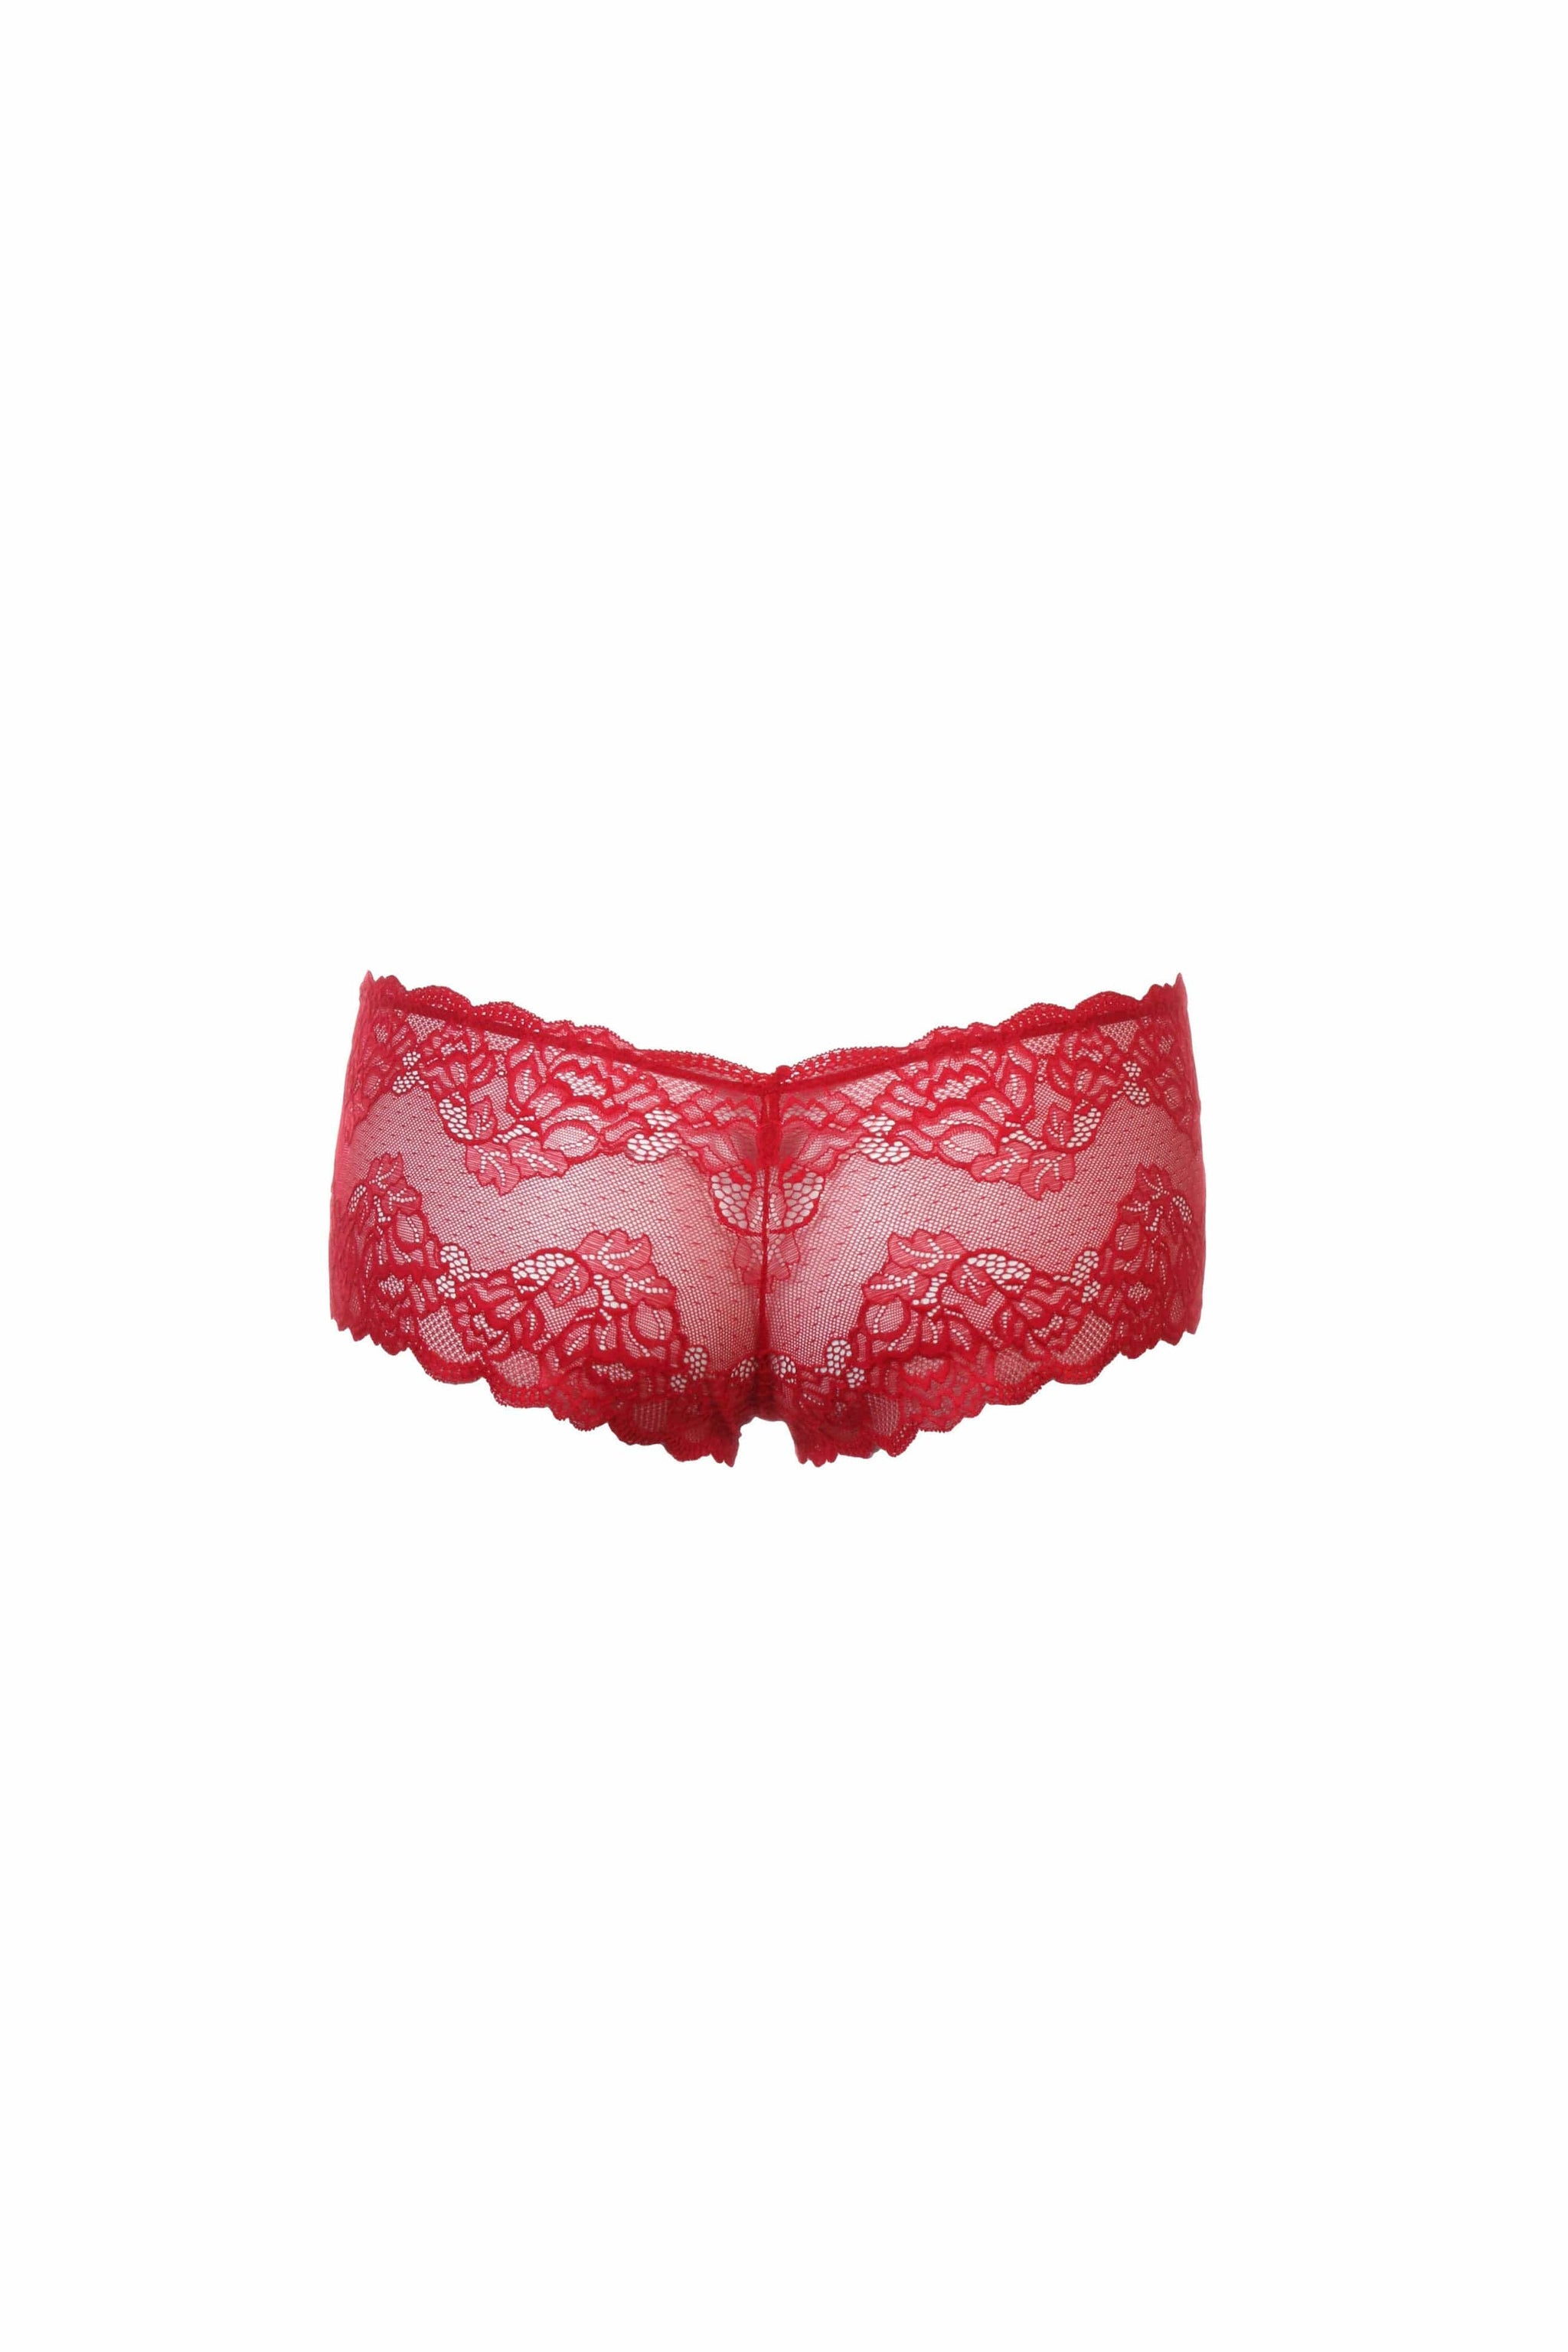 Romancing the Male Body with a Lace and See-through Underwear from JOR